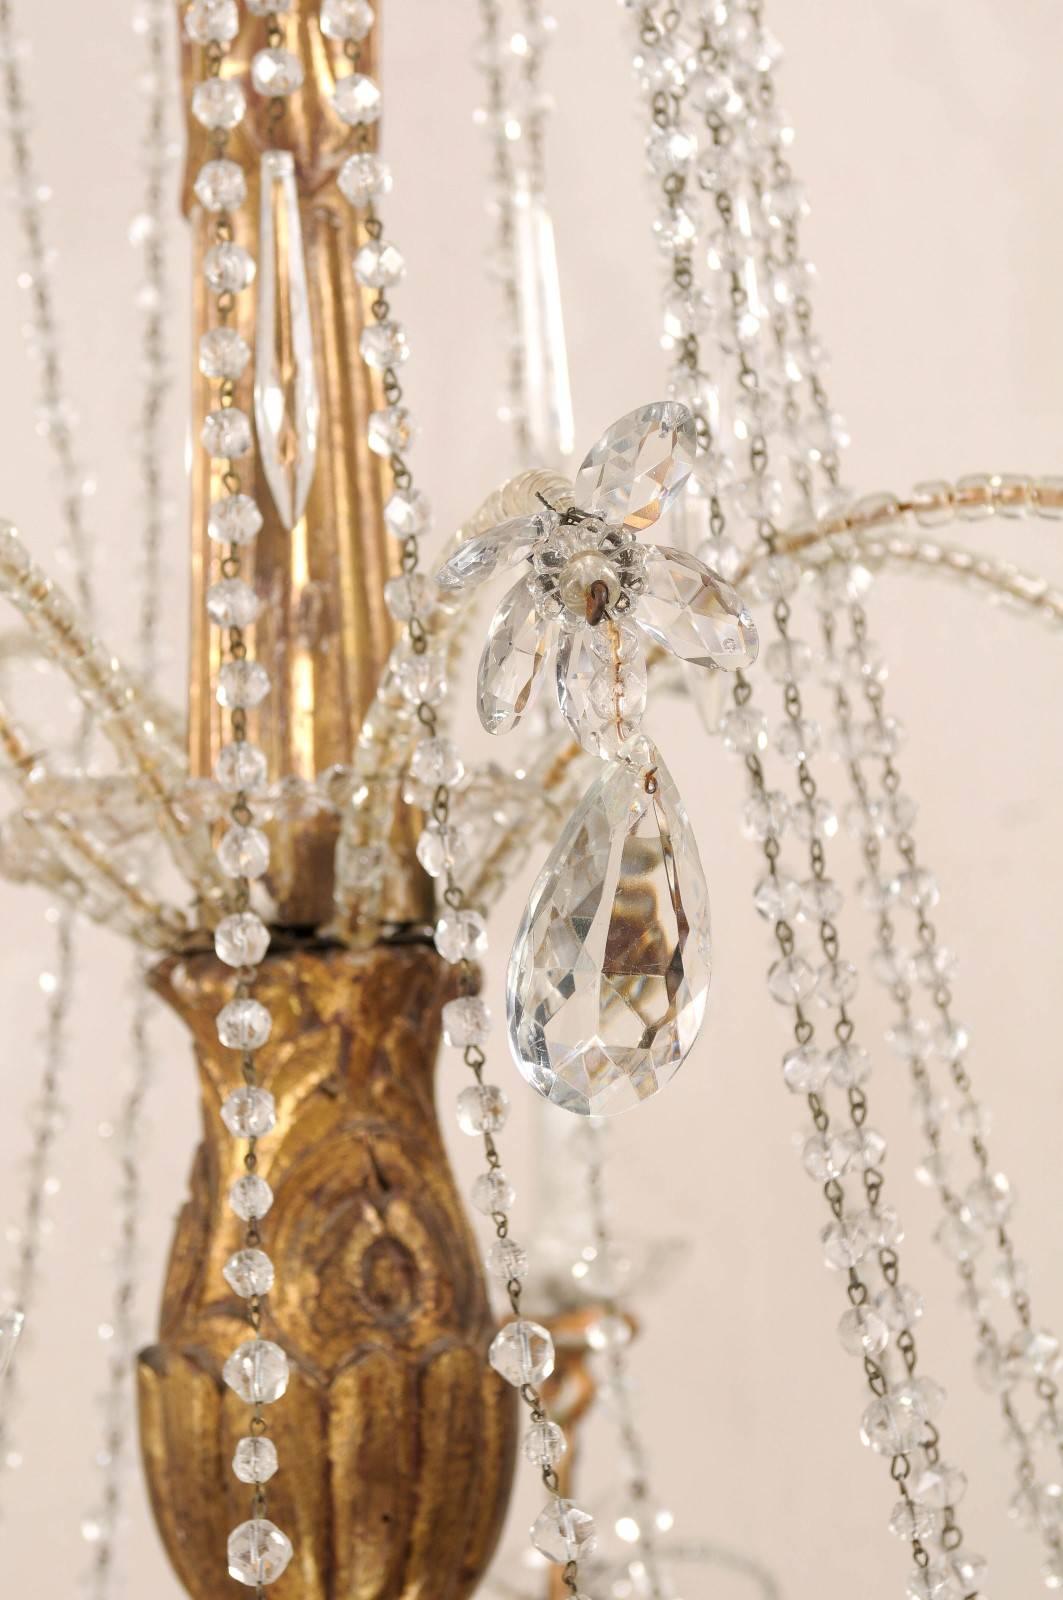 Italian Crystal and Giltwood Chandelier from the 19th Century - Gold Color 3